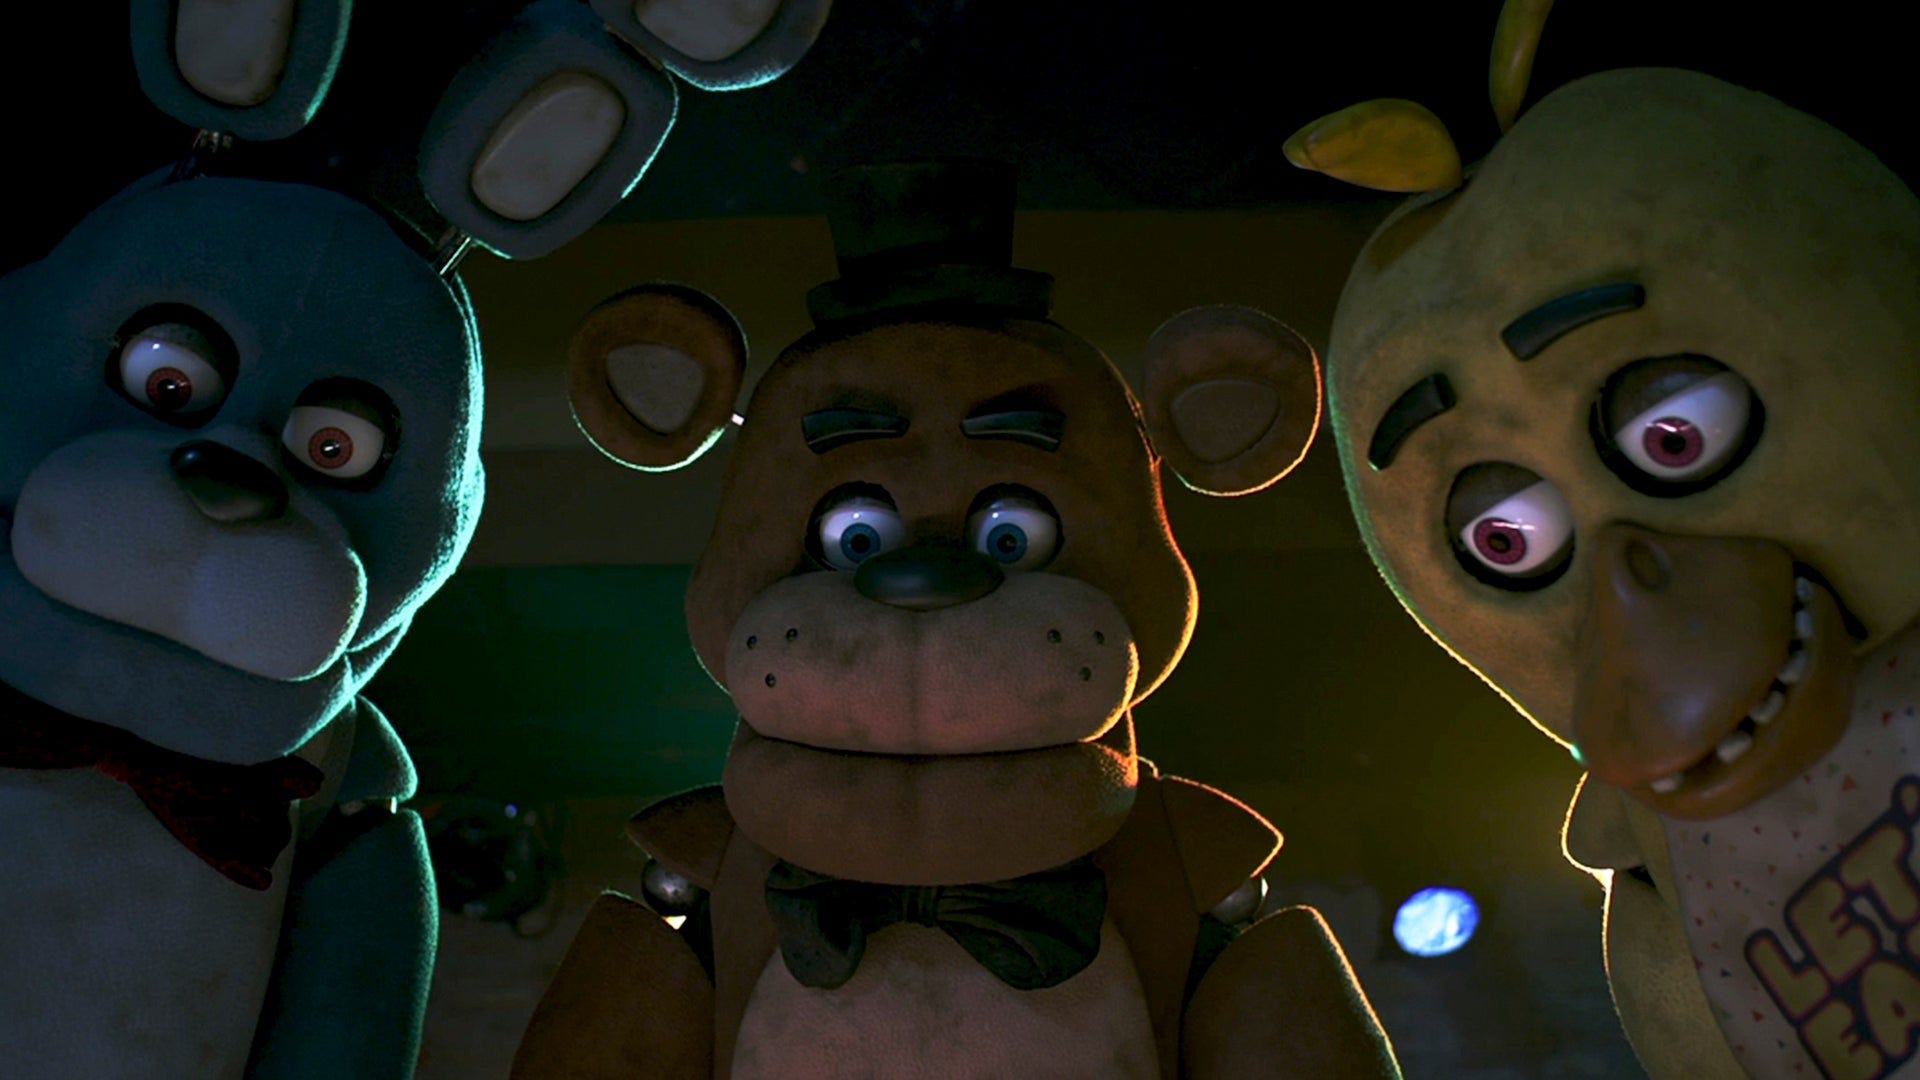 Five Nights at Freddy’s 2 locked in at Universal, will likely dominate Halloween 2025 regardless of quality